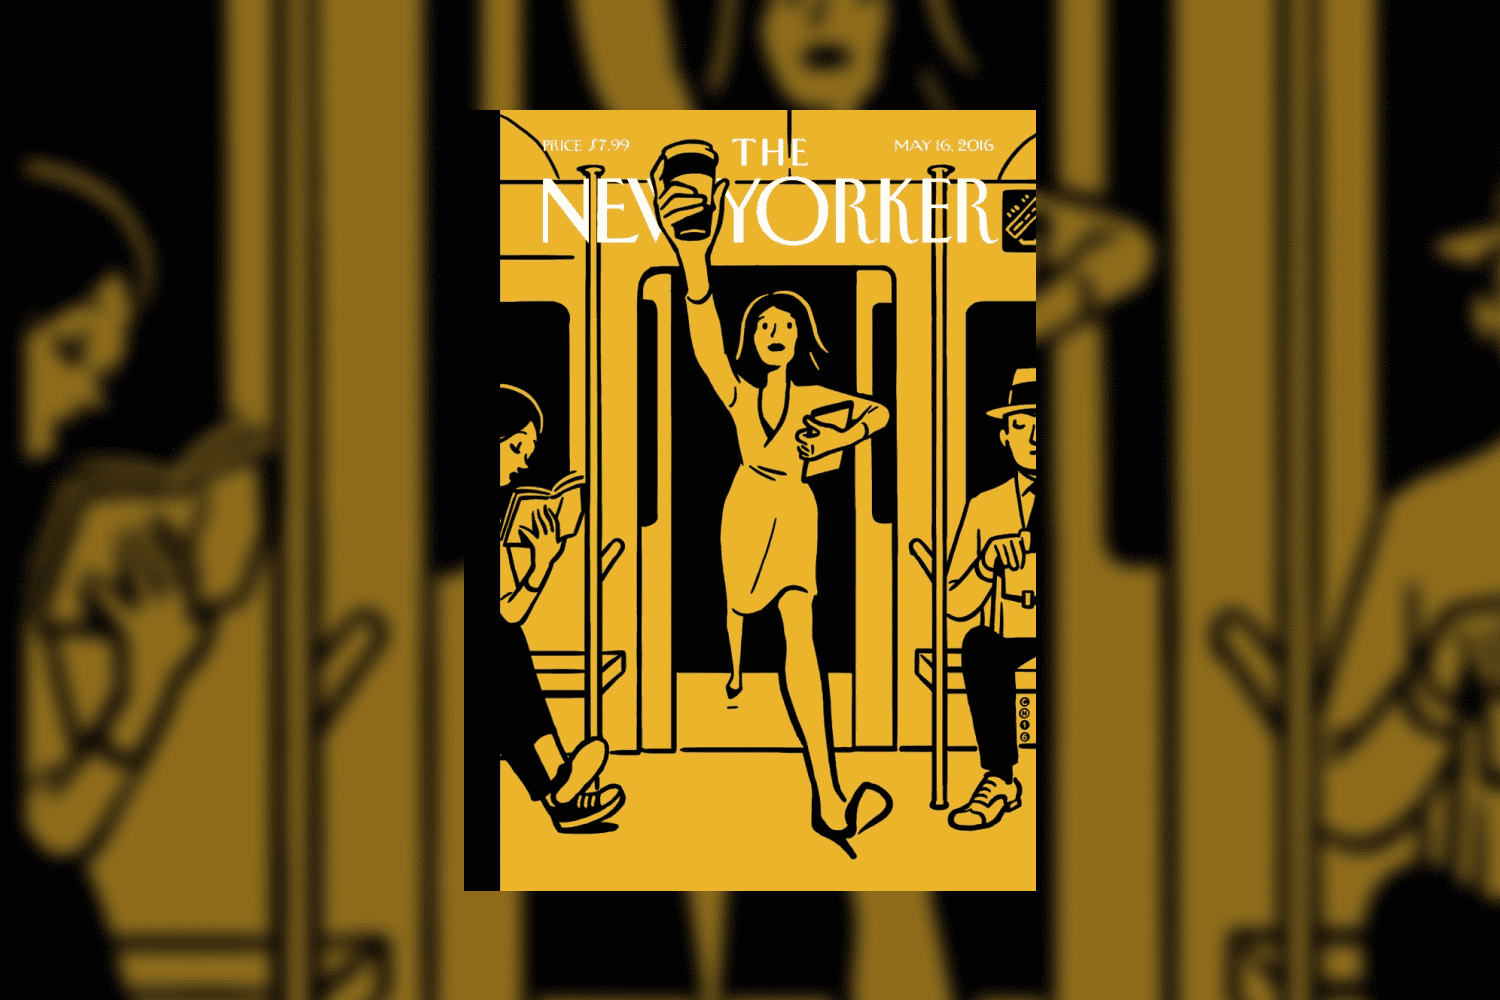 Image of the front page of The New Yorker magazine in yellow.